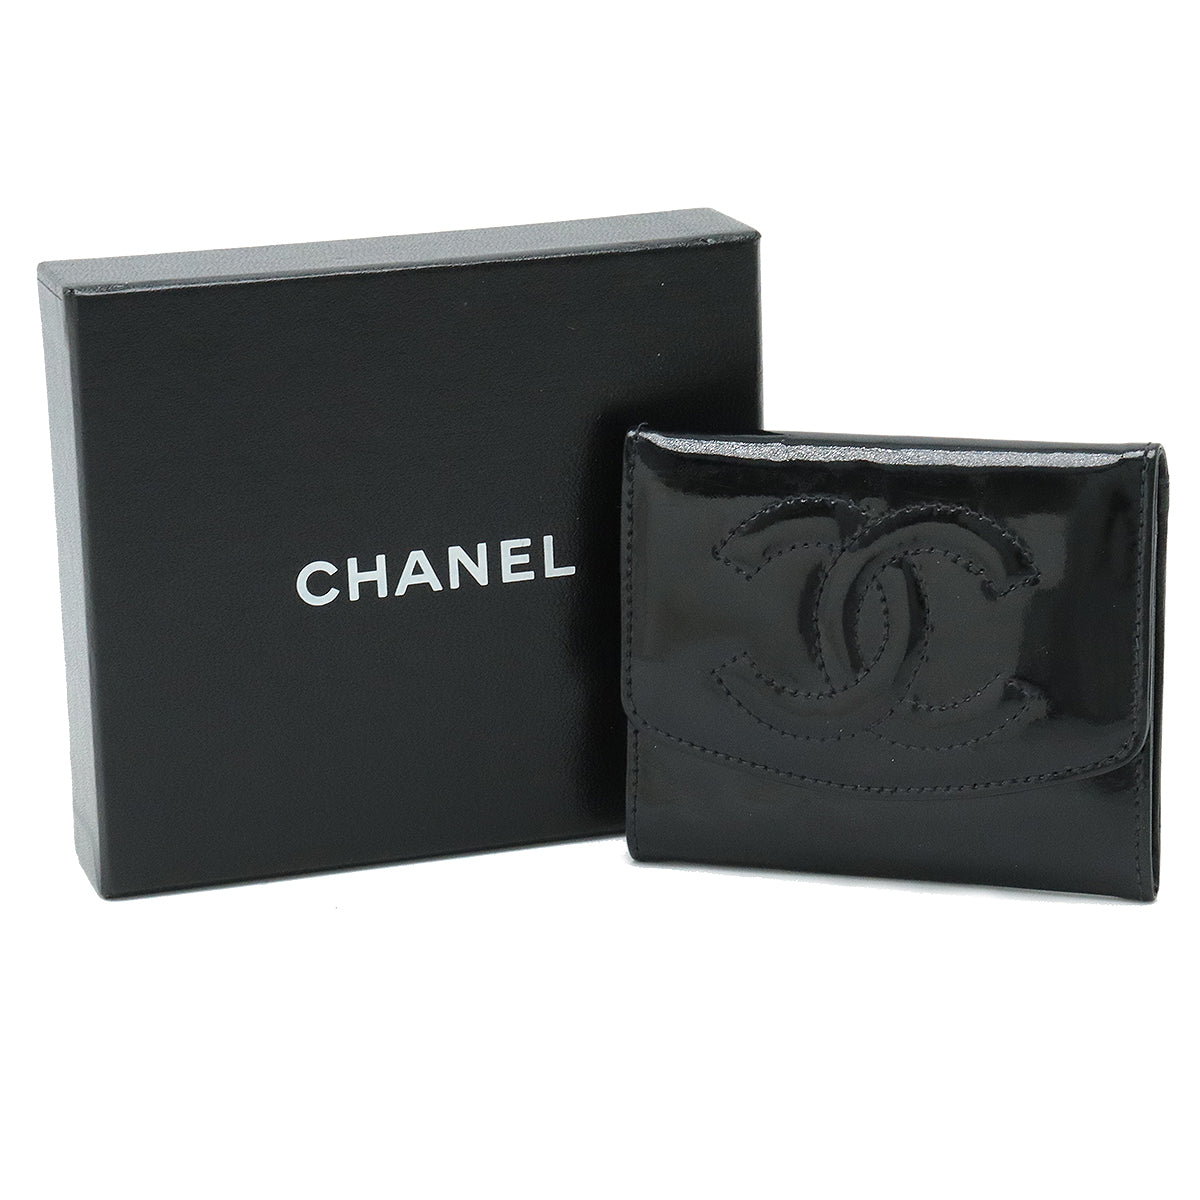 CHANEL Chanel Coinmark Coincase Coinwork Coinwork Patent Leather Black Black Silver Gold A01430